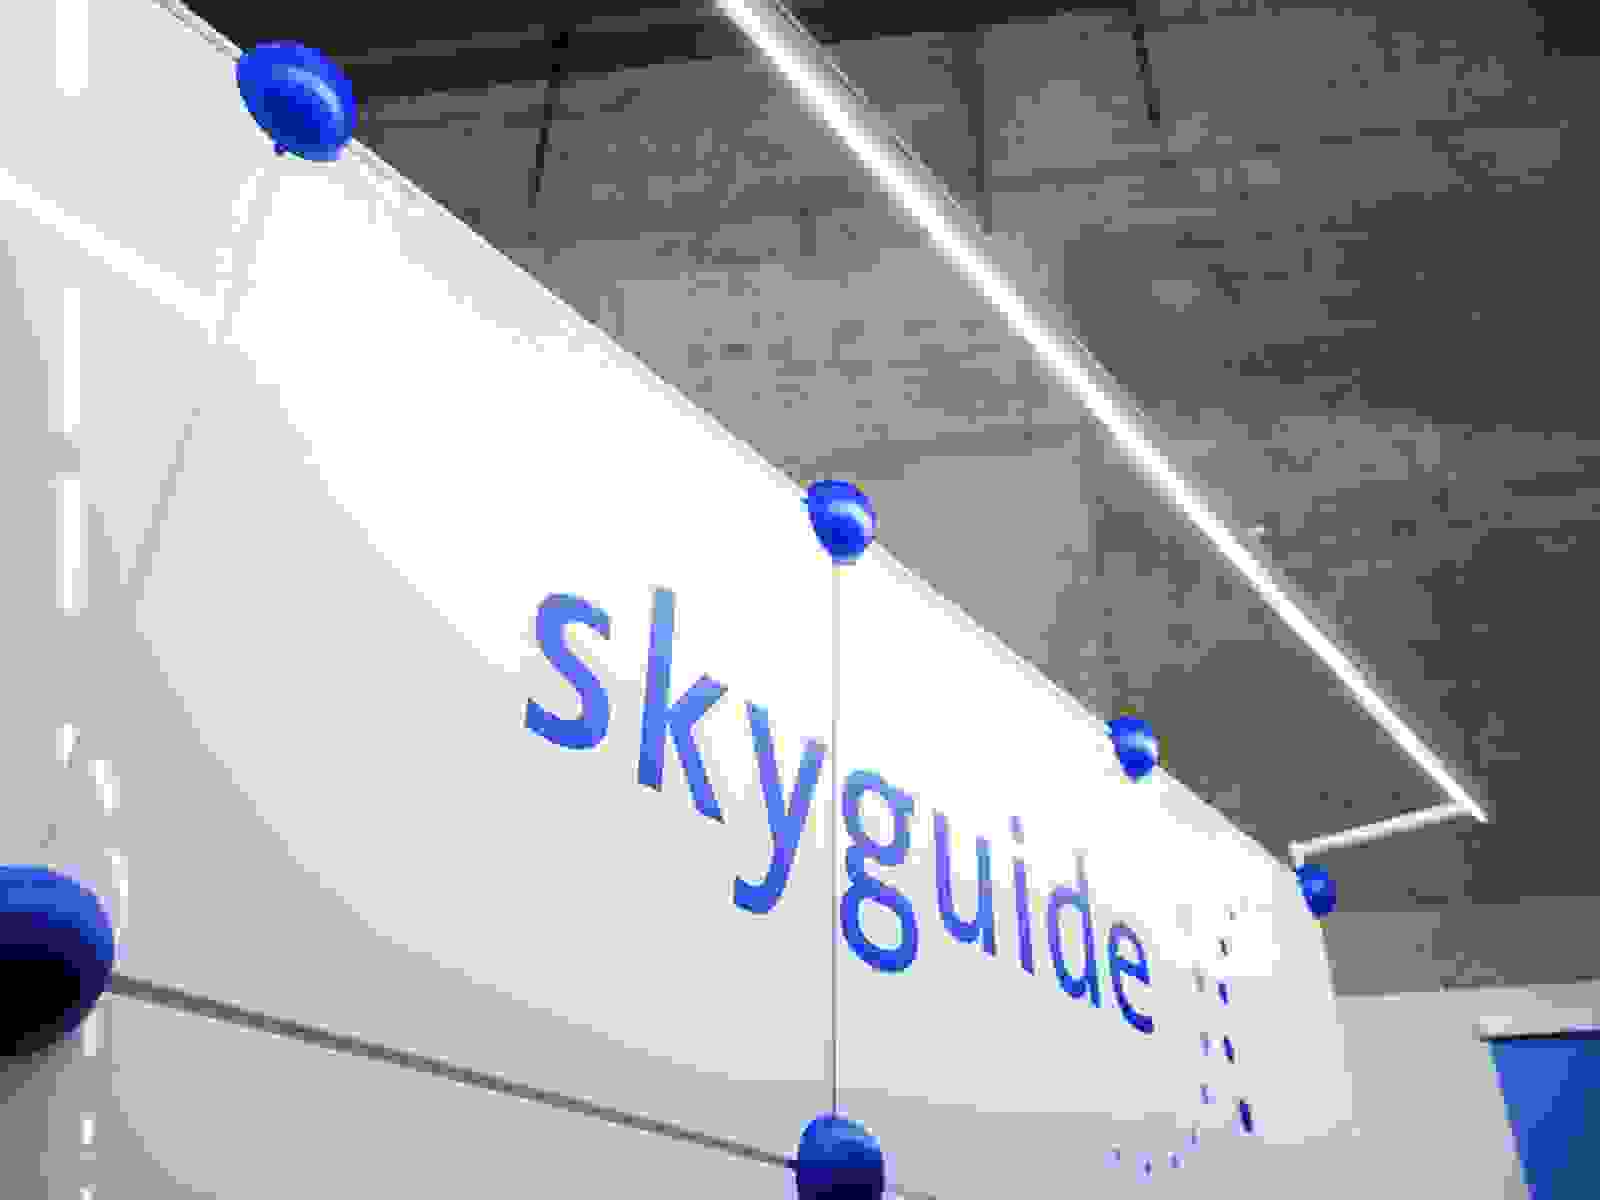 Messesystem Sysball bei Skyguide